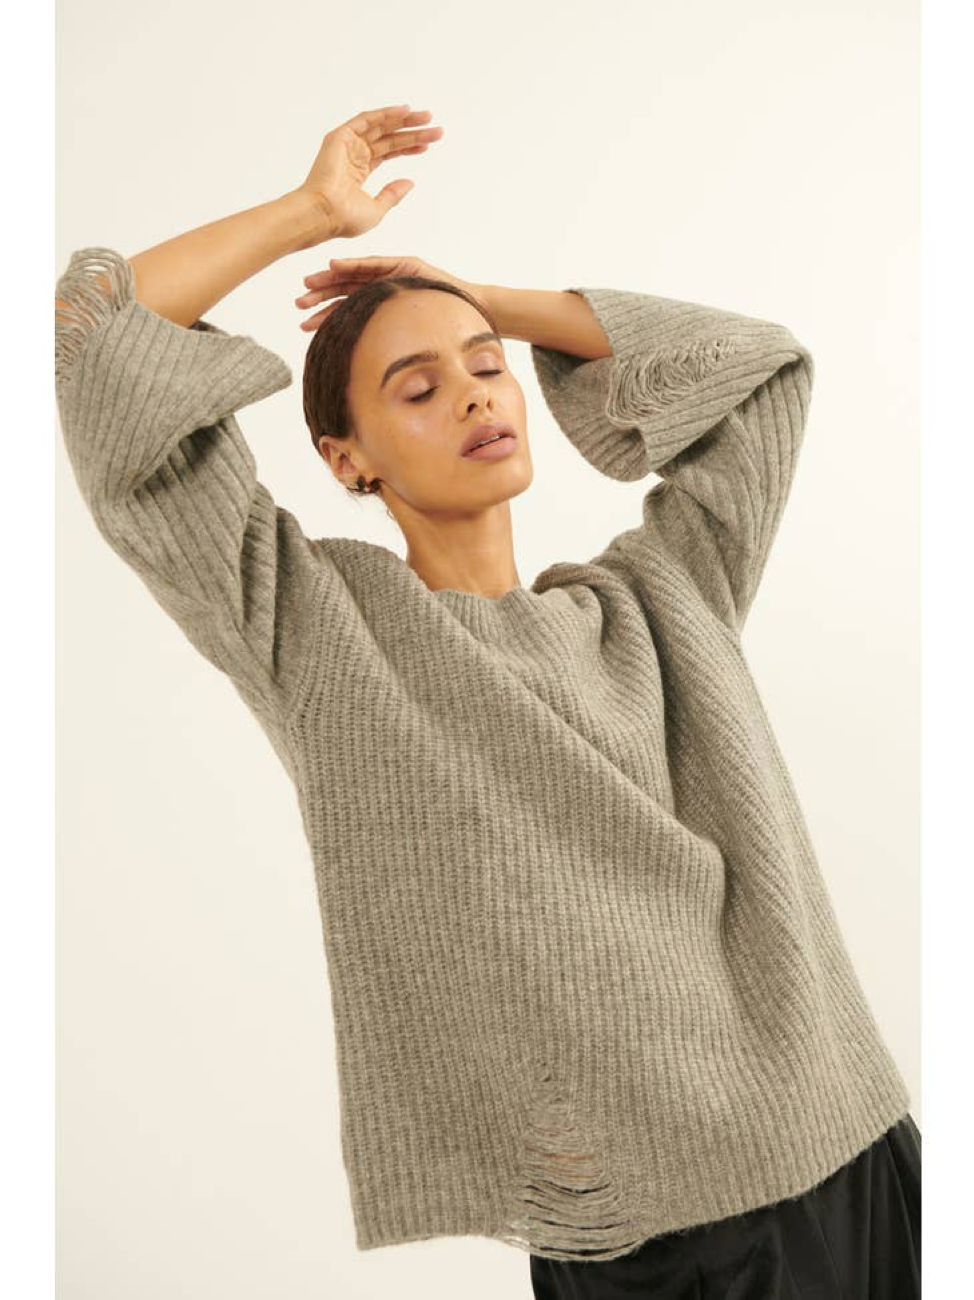 Ribbed Knit Distressed Sweater